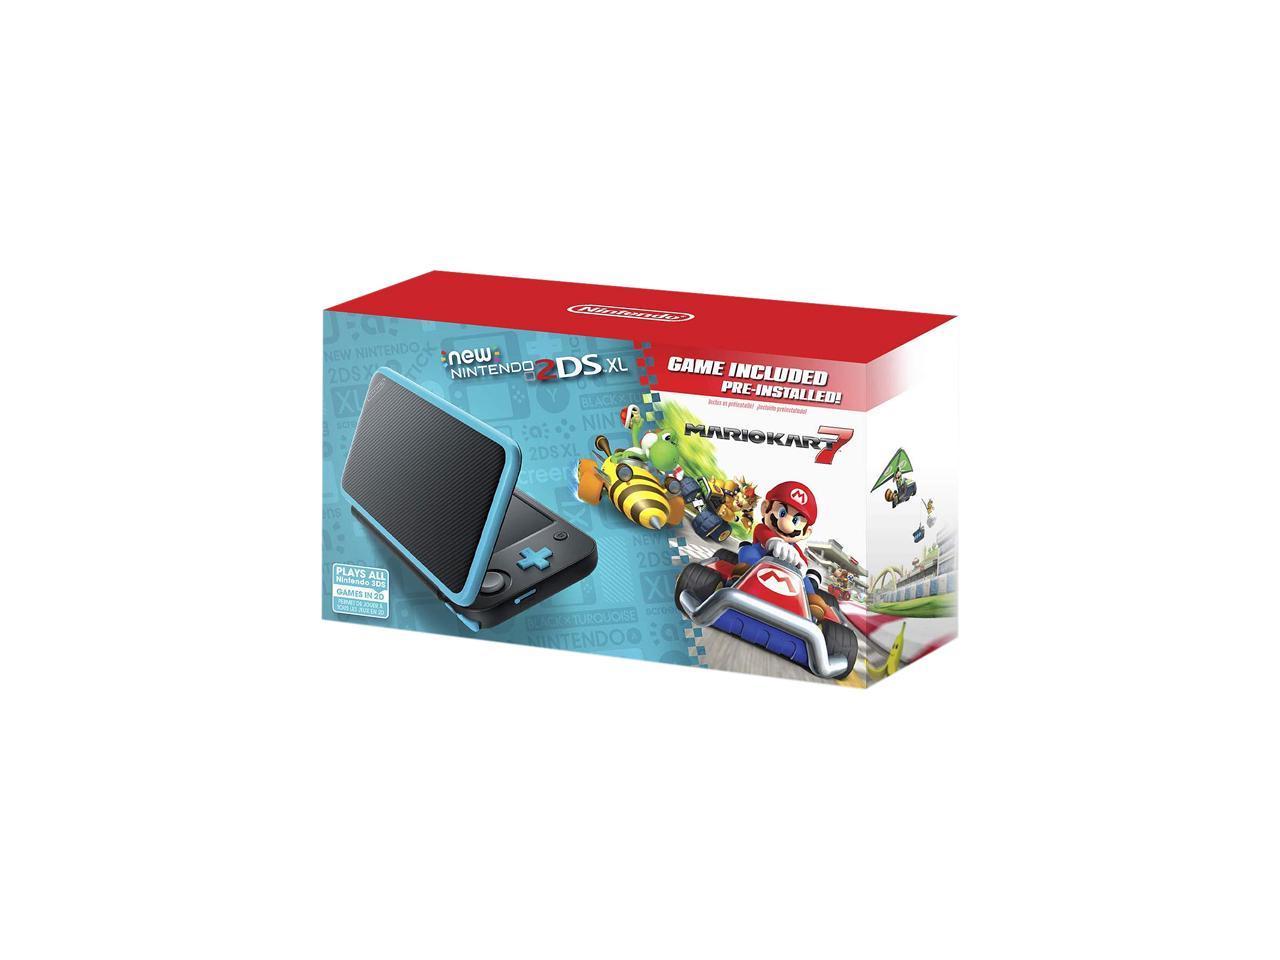 New Nintendo 2ds Xl Black Turquoise With Mario Kart 7 Pre Installed Newegg Com